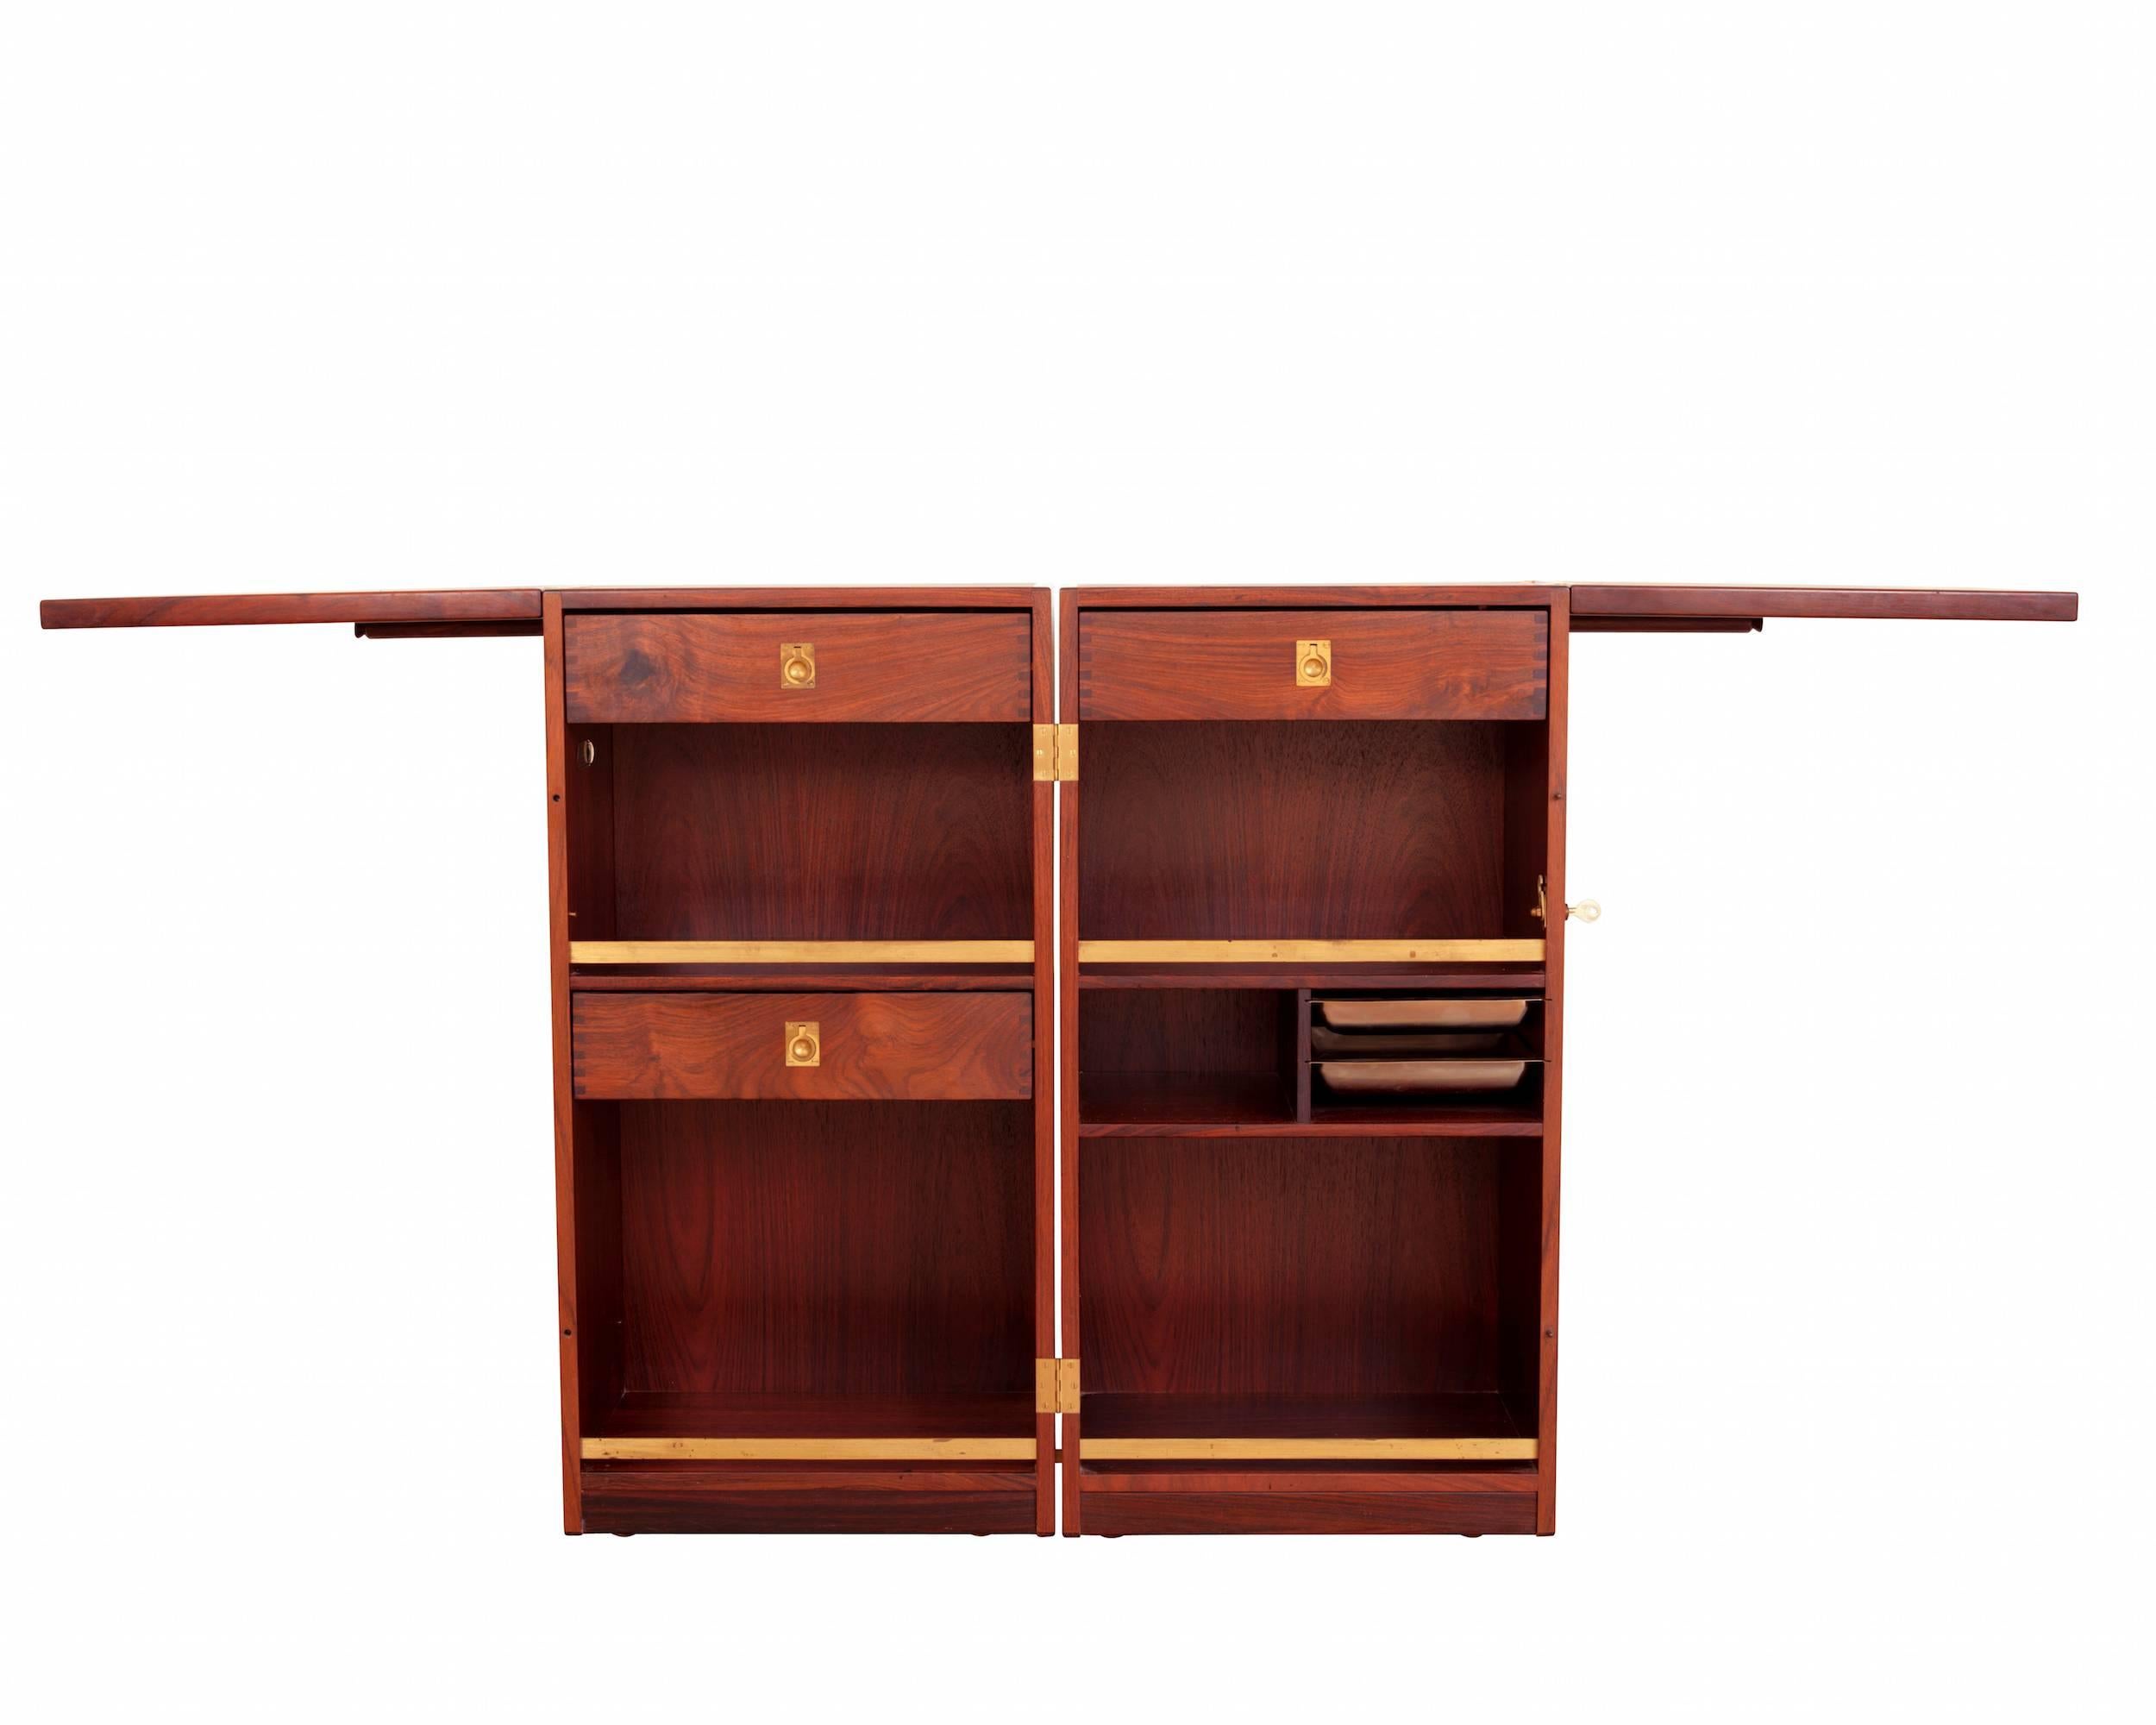 Rosewood bar on wheels with drawers with brass fittings and unfolding table tops with black formica. 
Measurements are taken when the bar is closed completely.